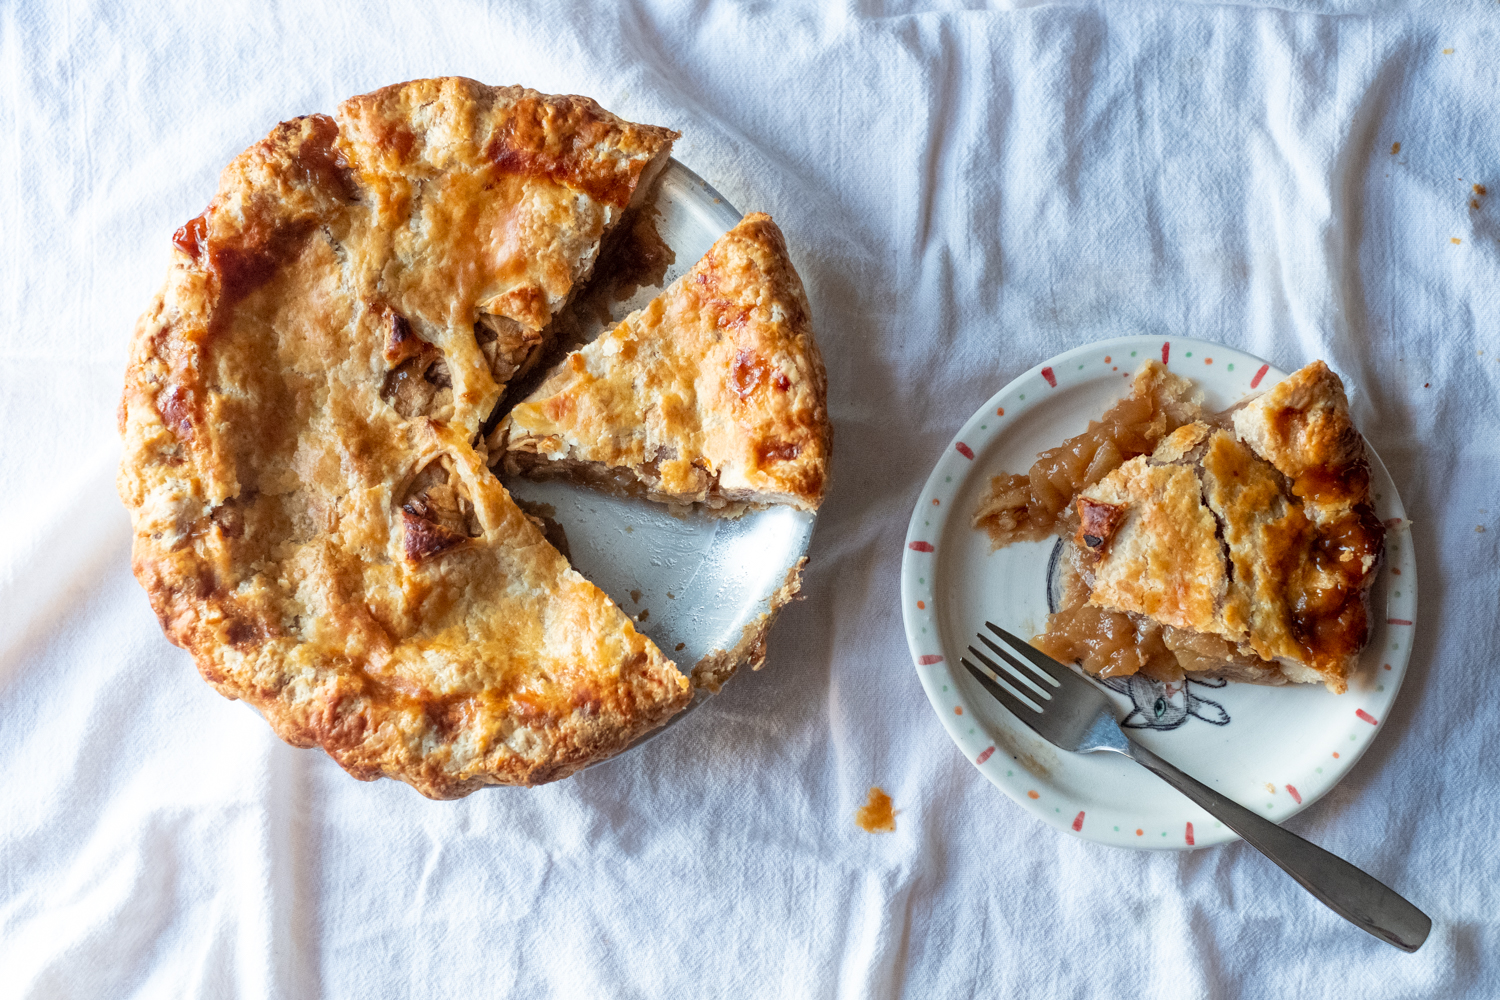 Get a good bake every time with these pie-making secrets